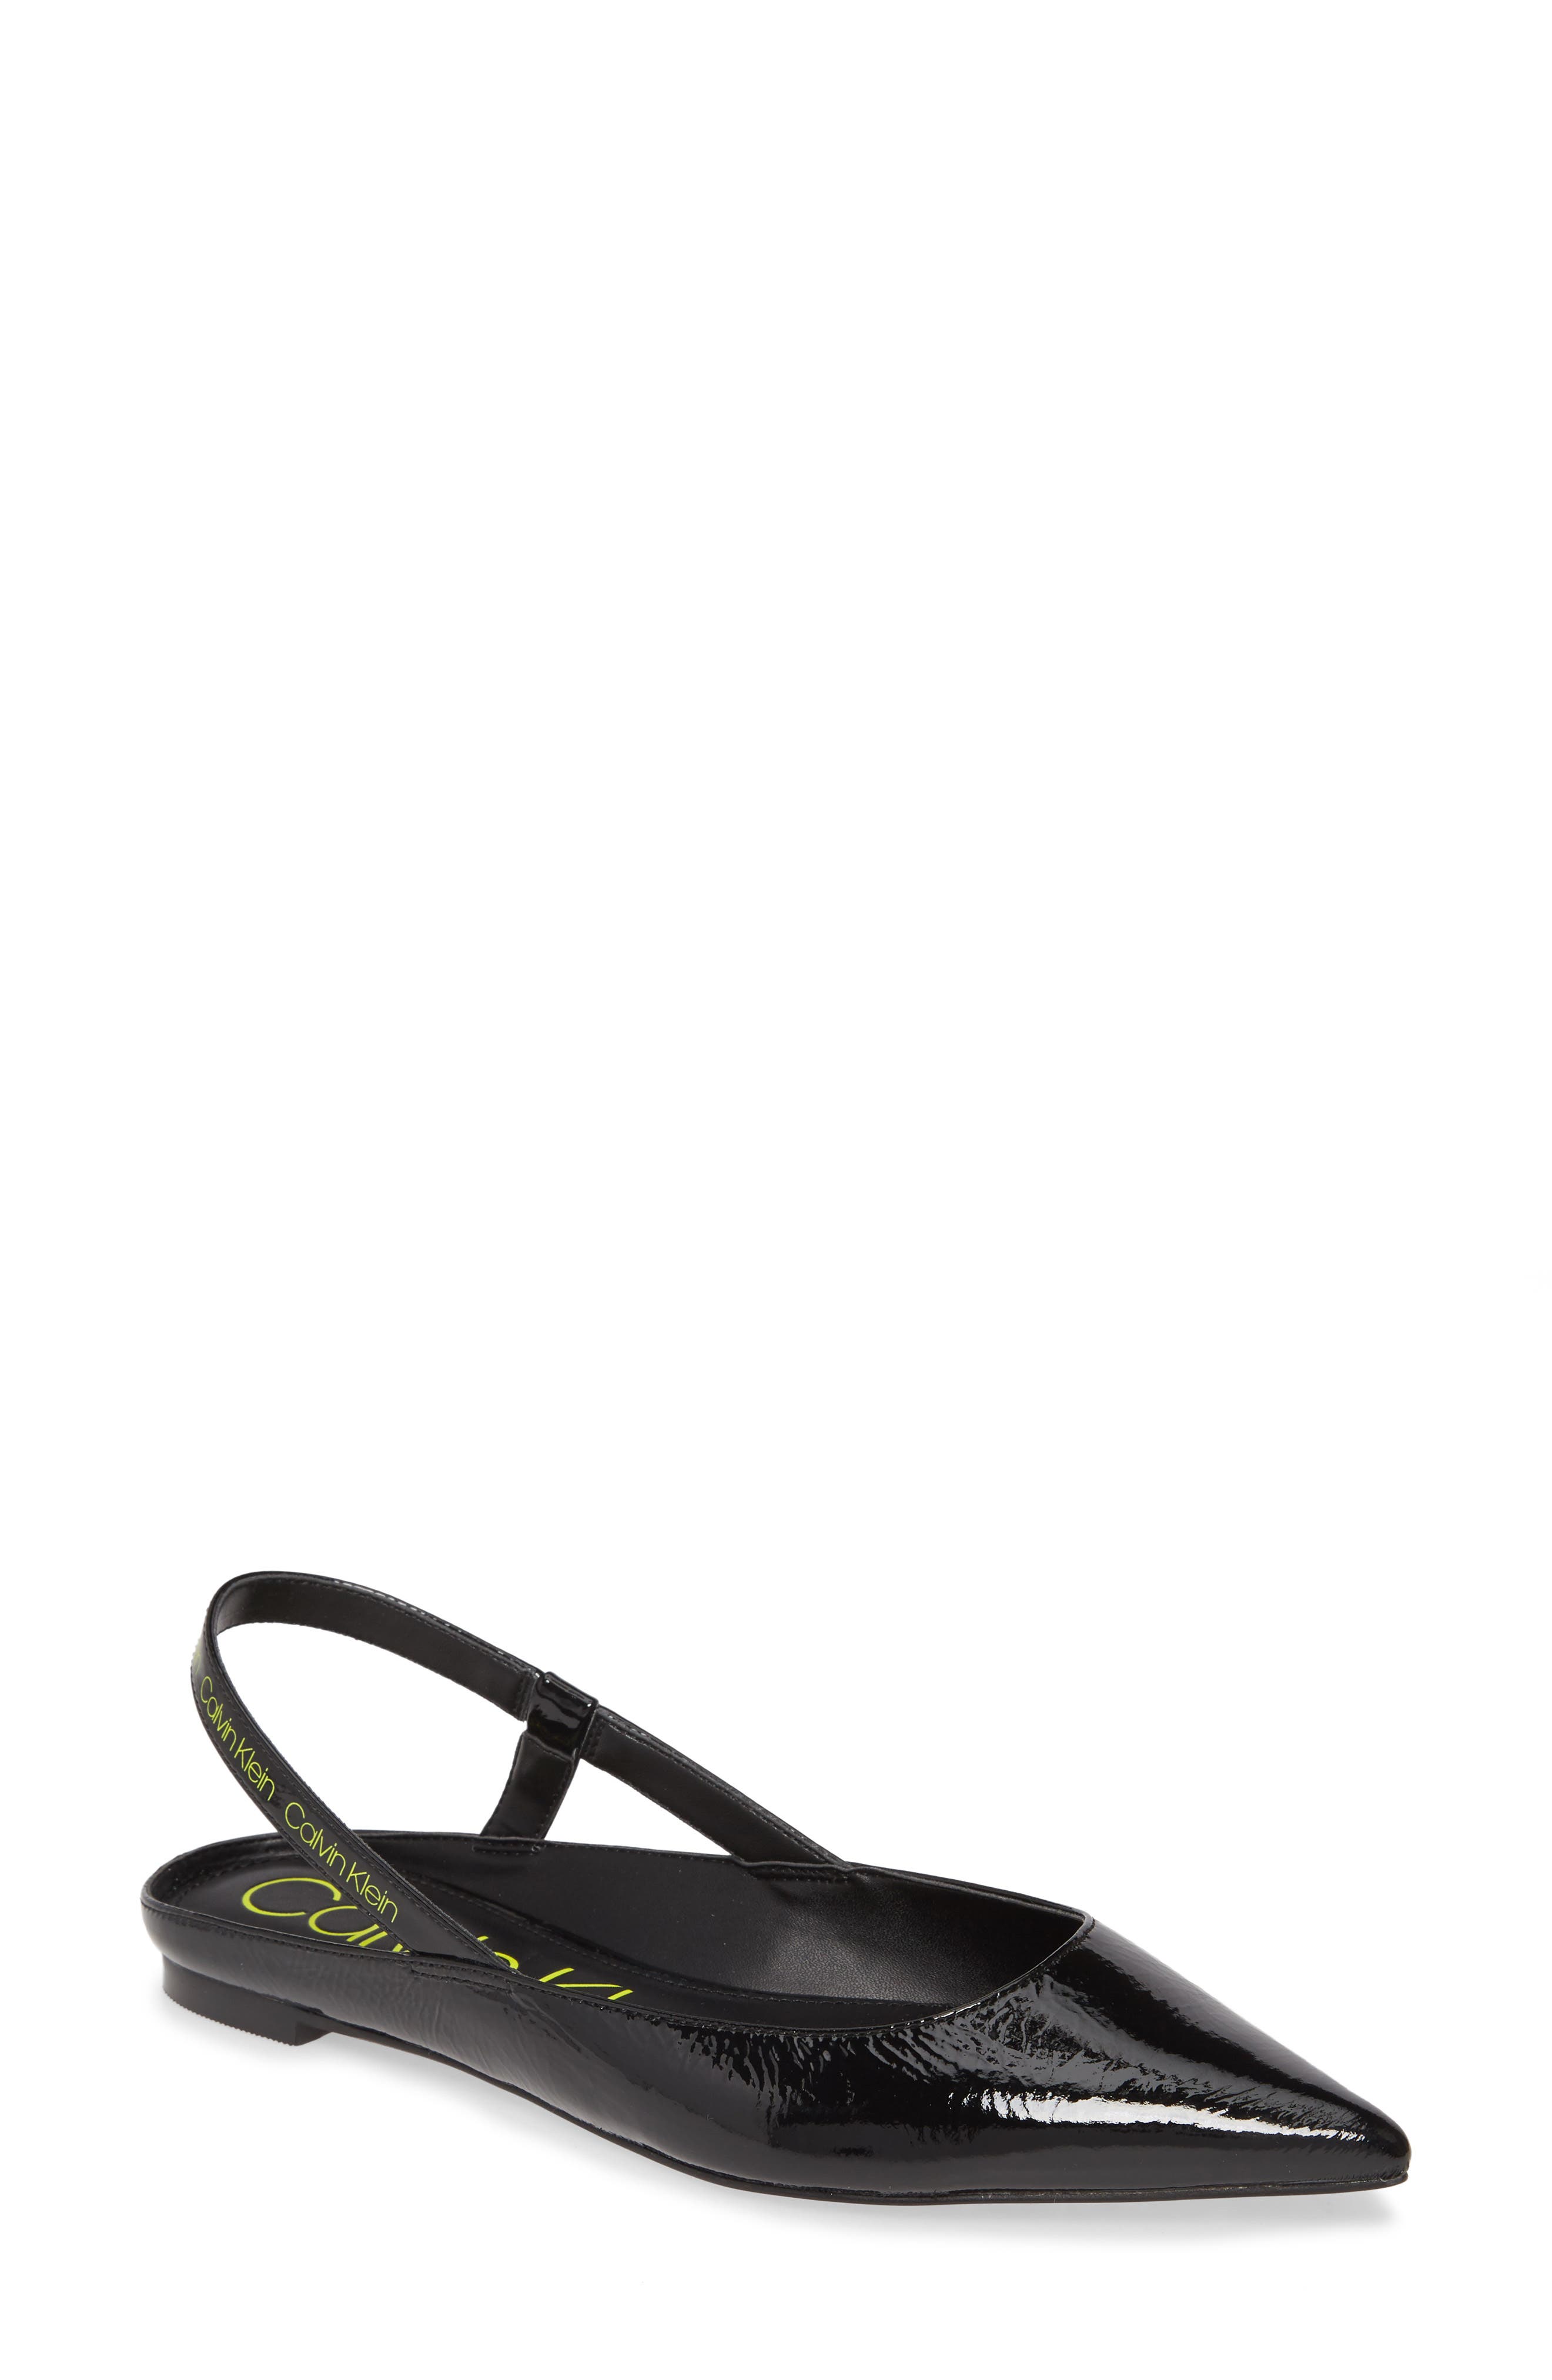 calvin klein patent leather flats